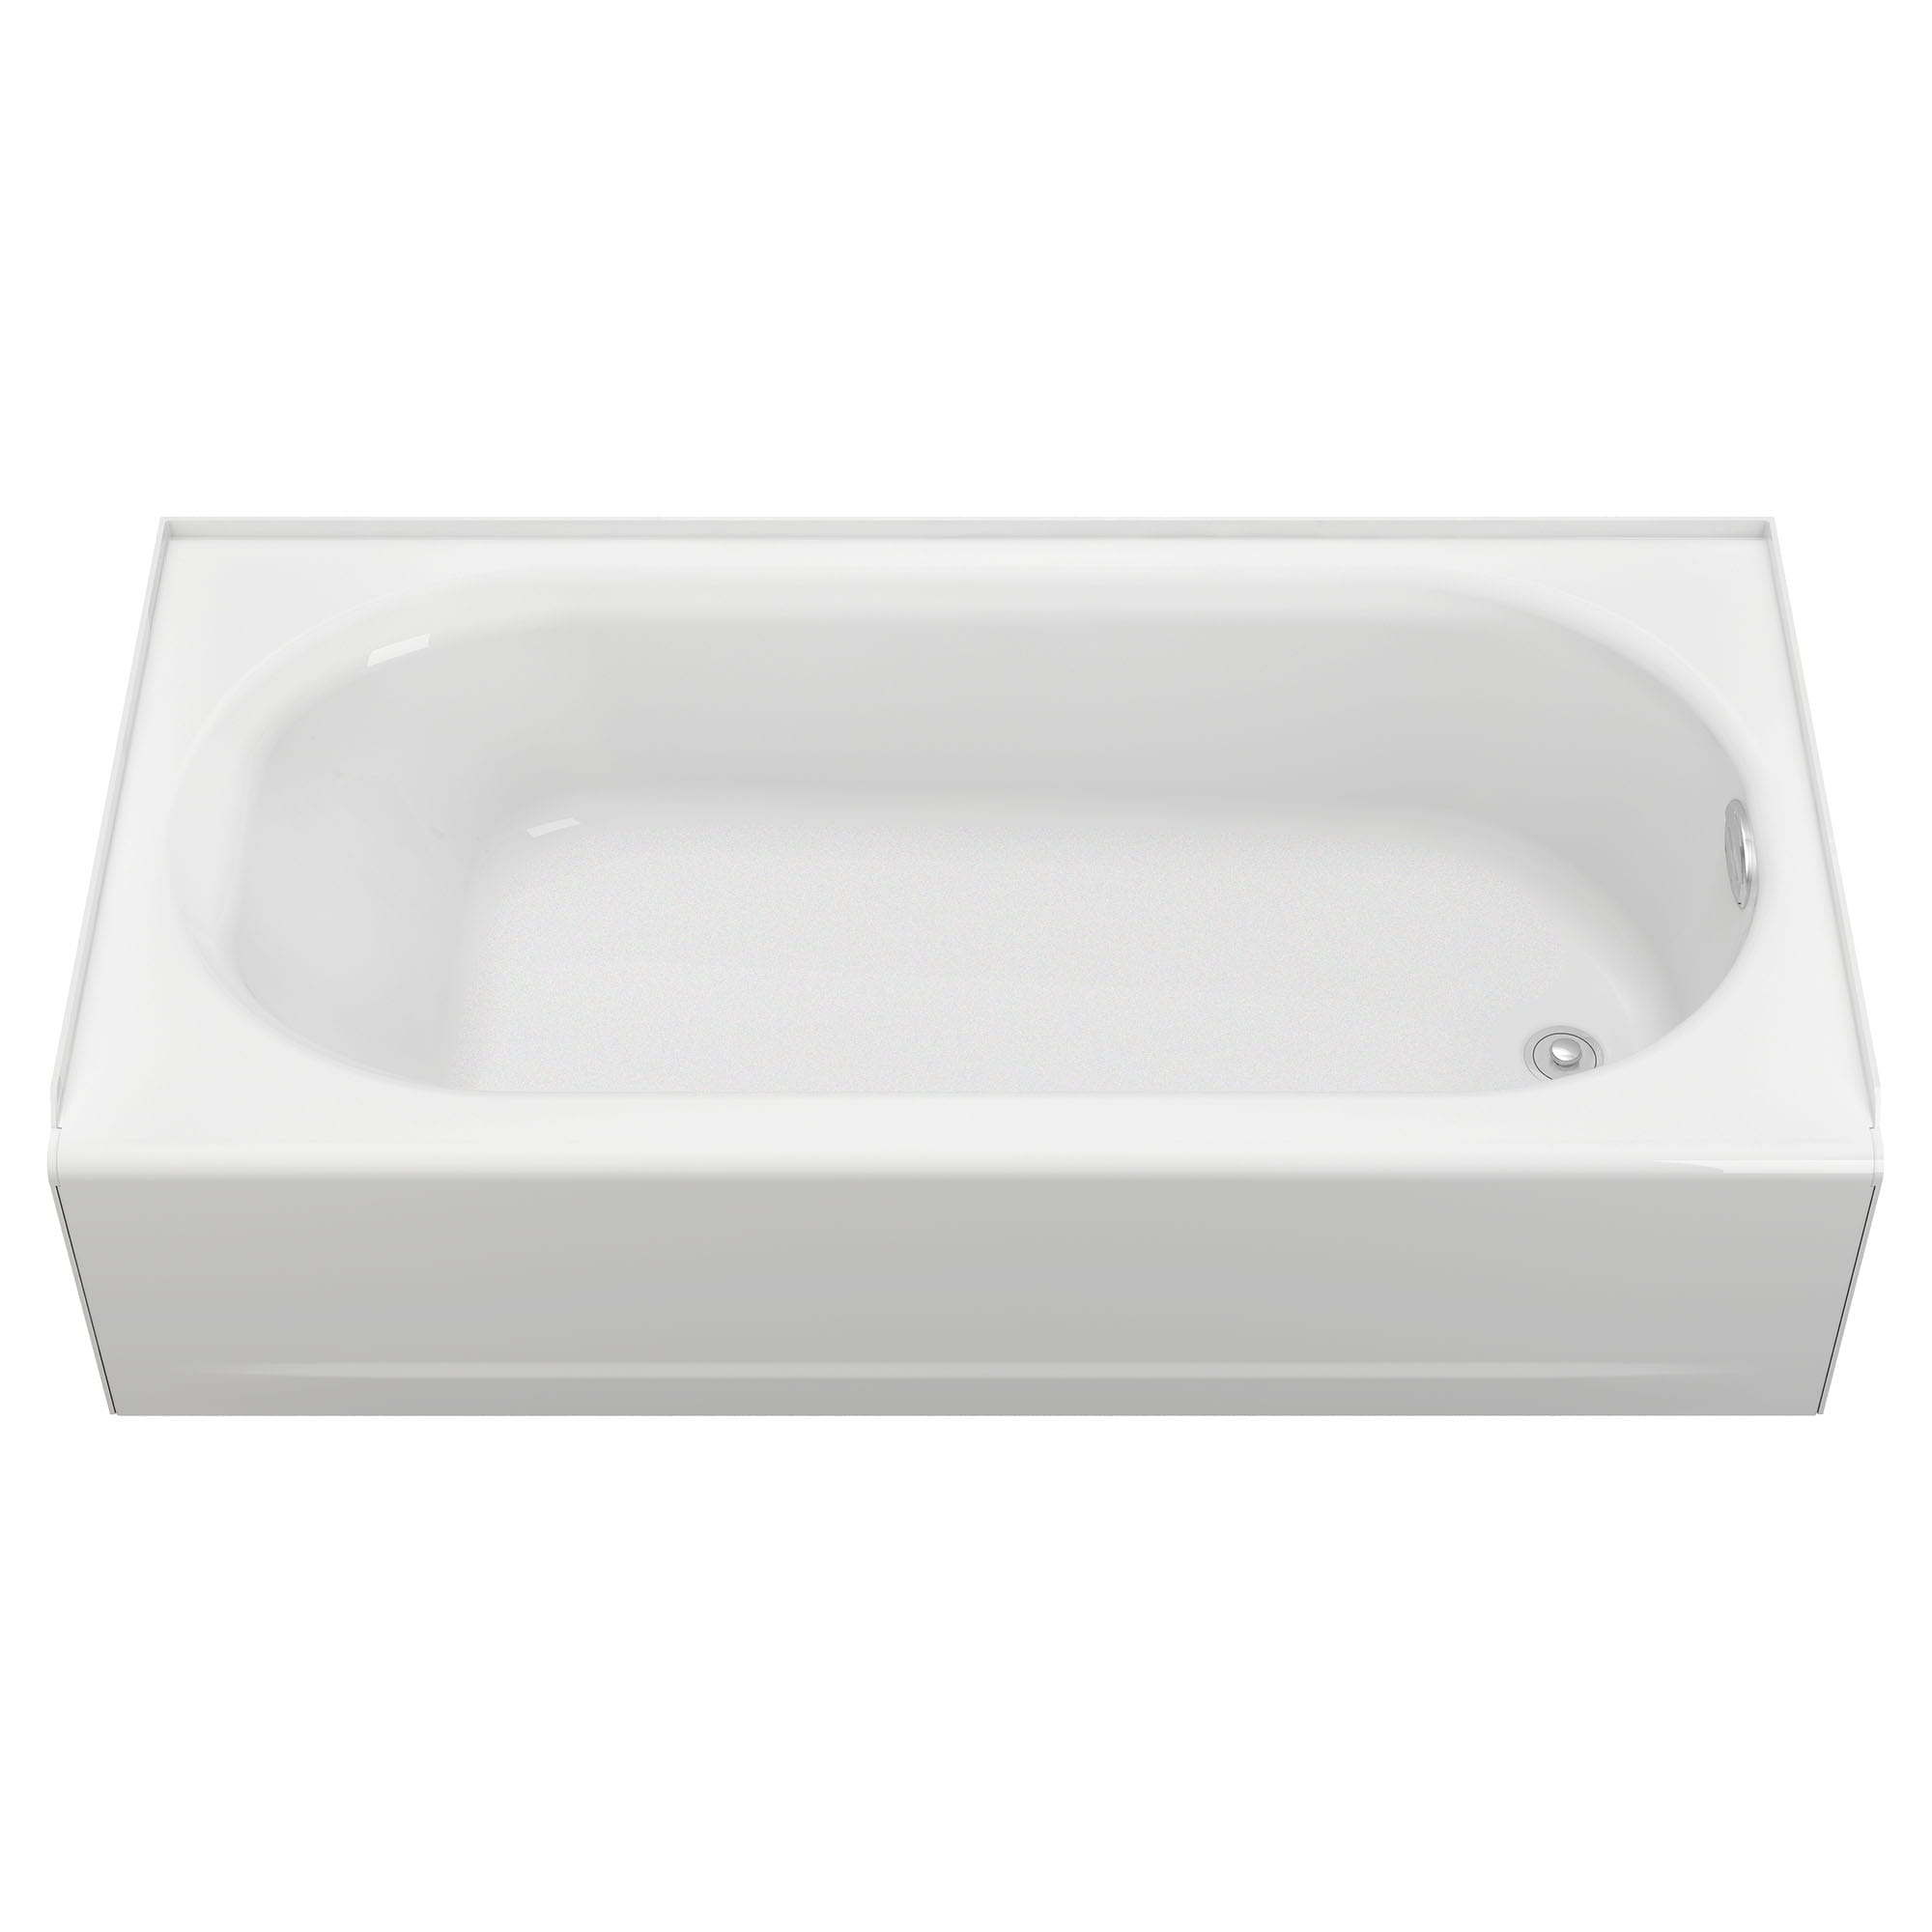 Princeton Americast 60 x 30 Inch Integral Apron Bathtub Right Hand Outlet With Integral Drain WHITE